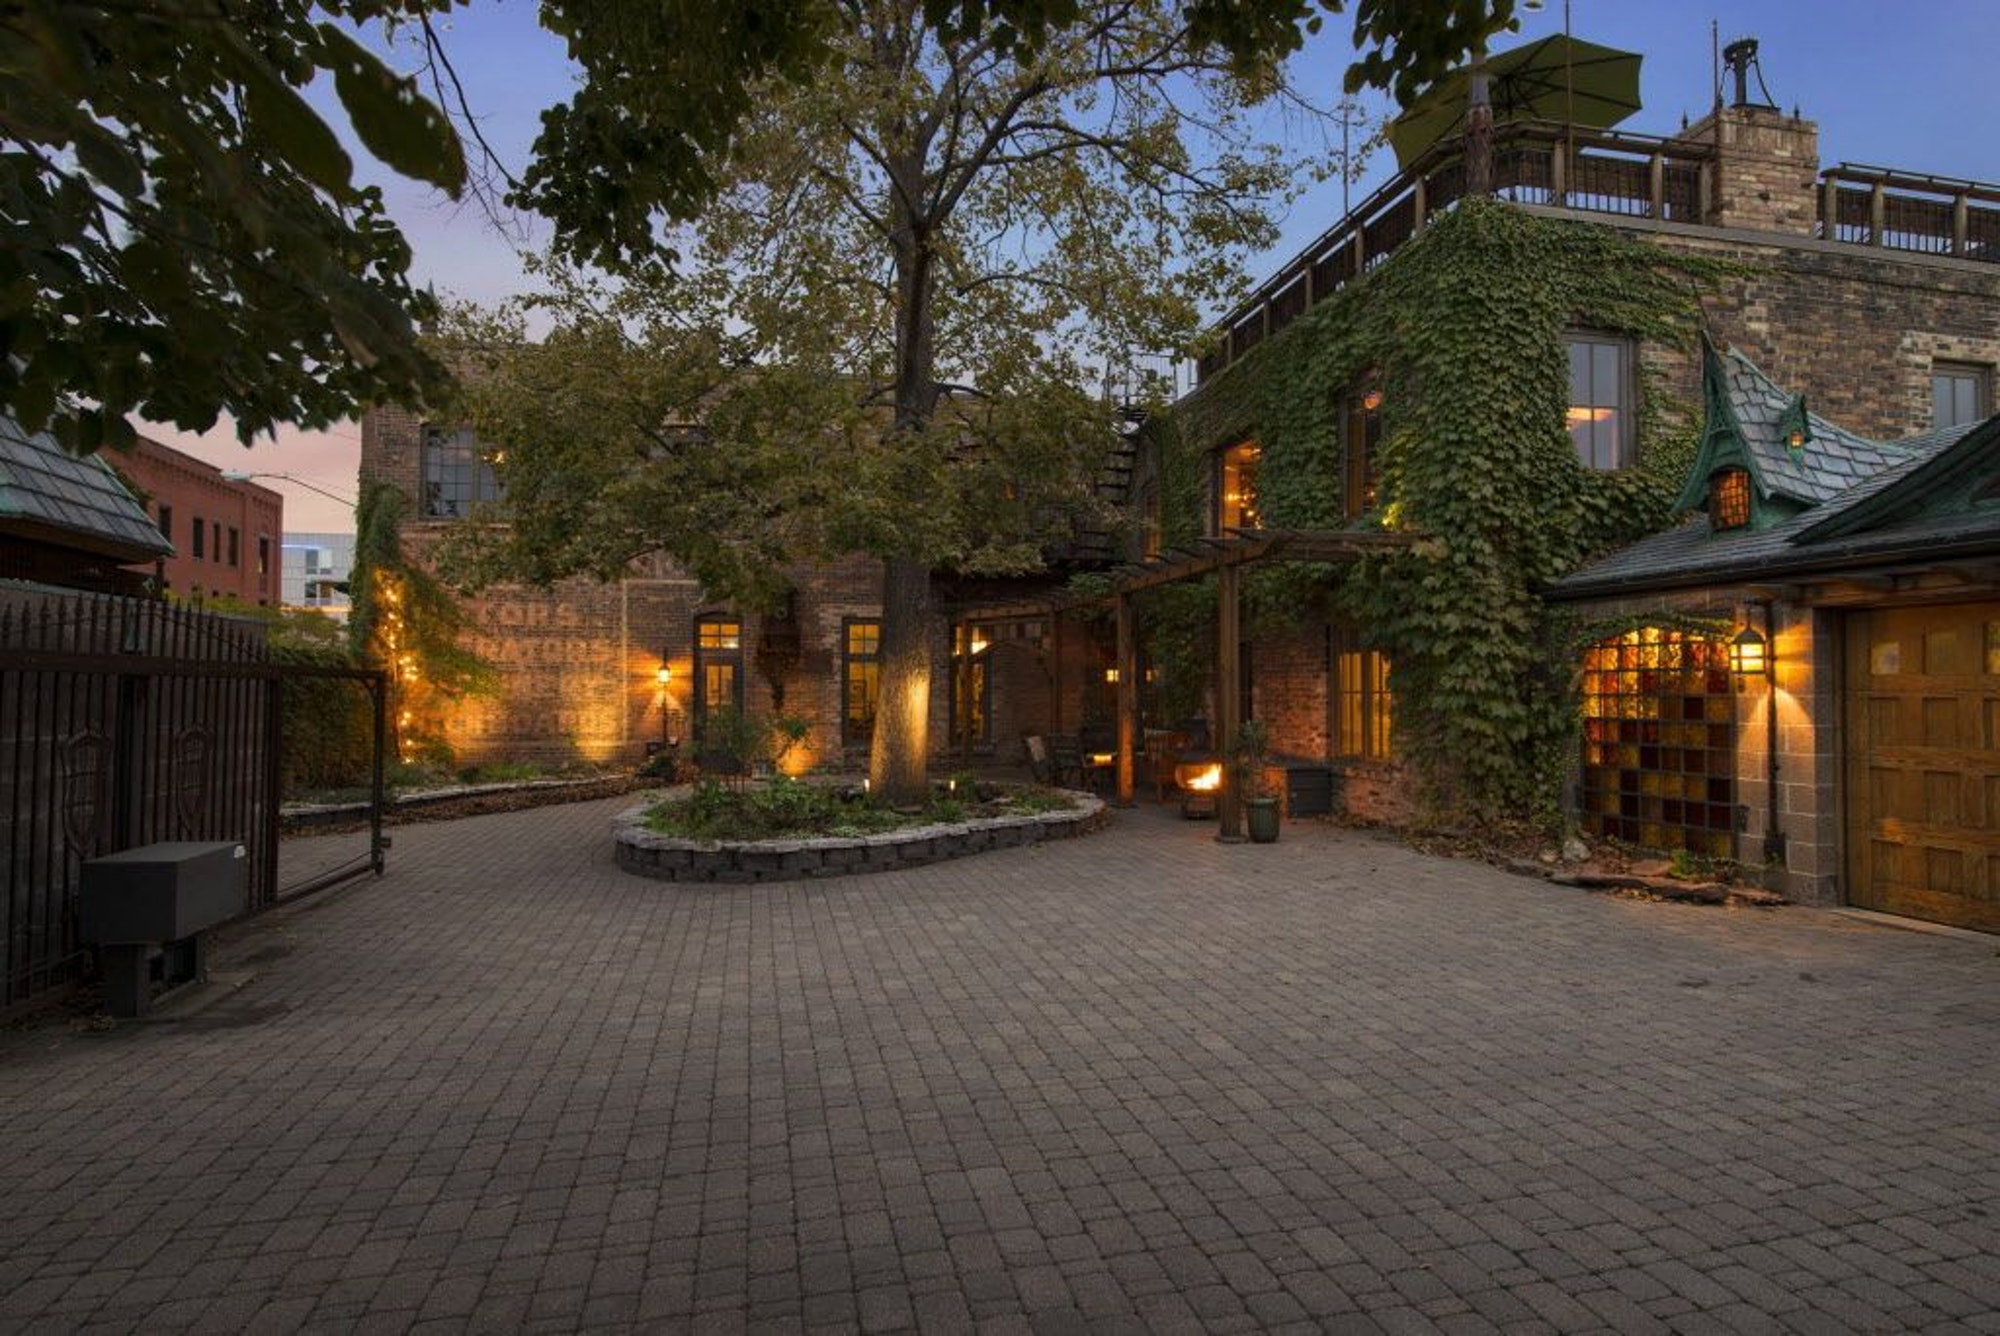 Urban castle in downtown Mpls. back on market for $2.995M after ...